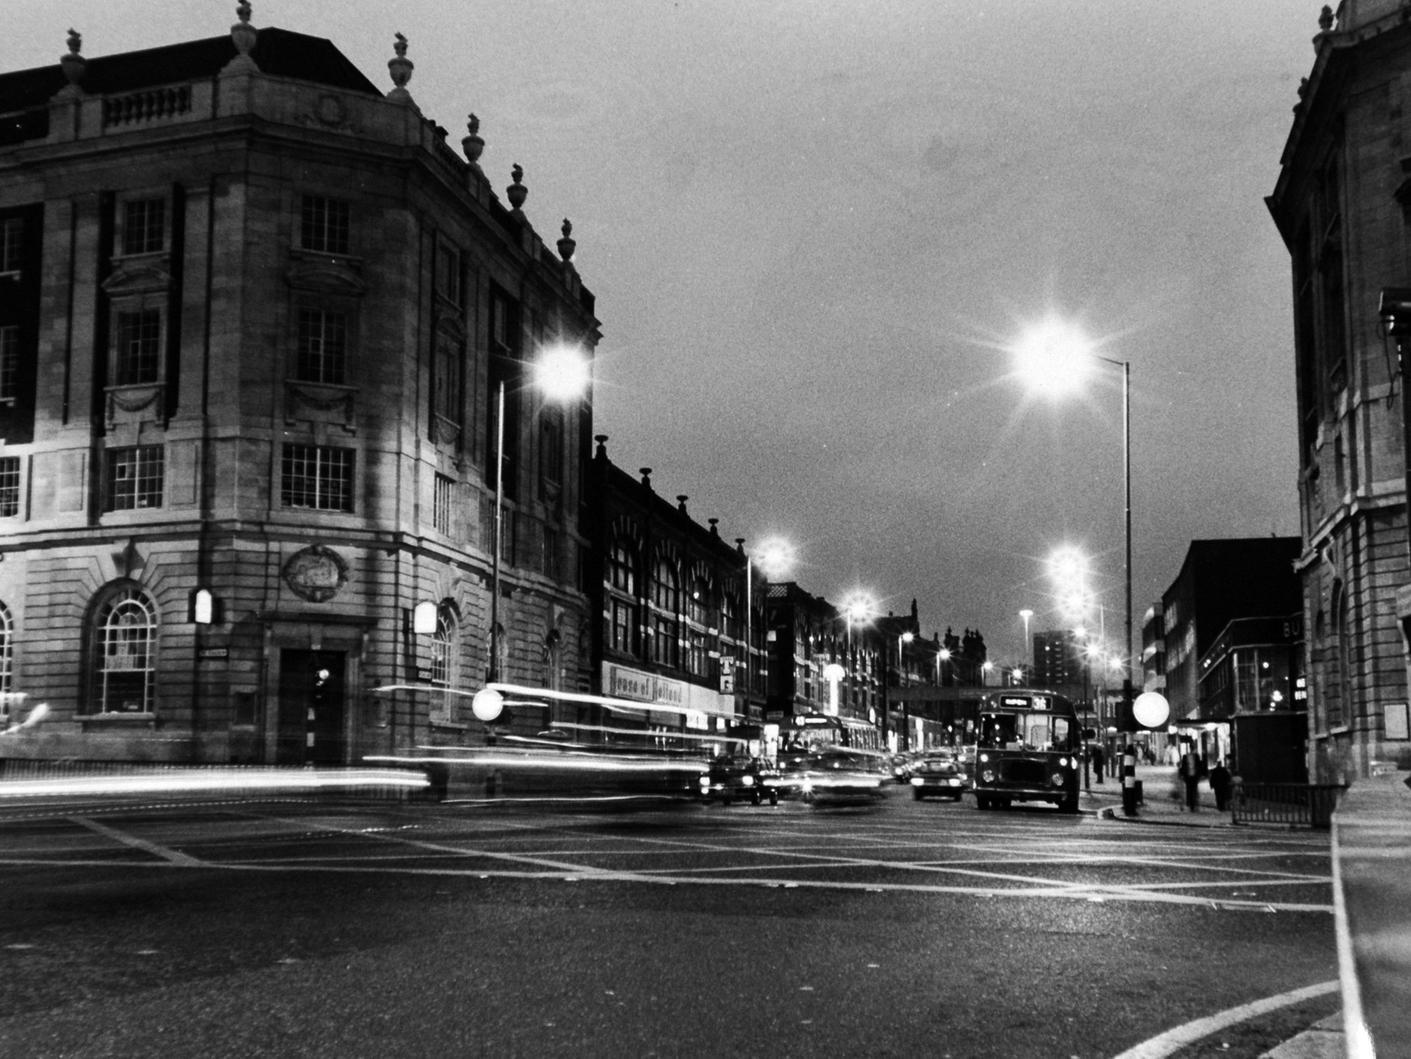 A night scene of Vicar Lane from its junction with The Headrow.